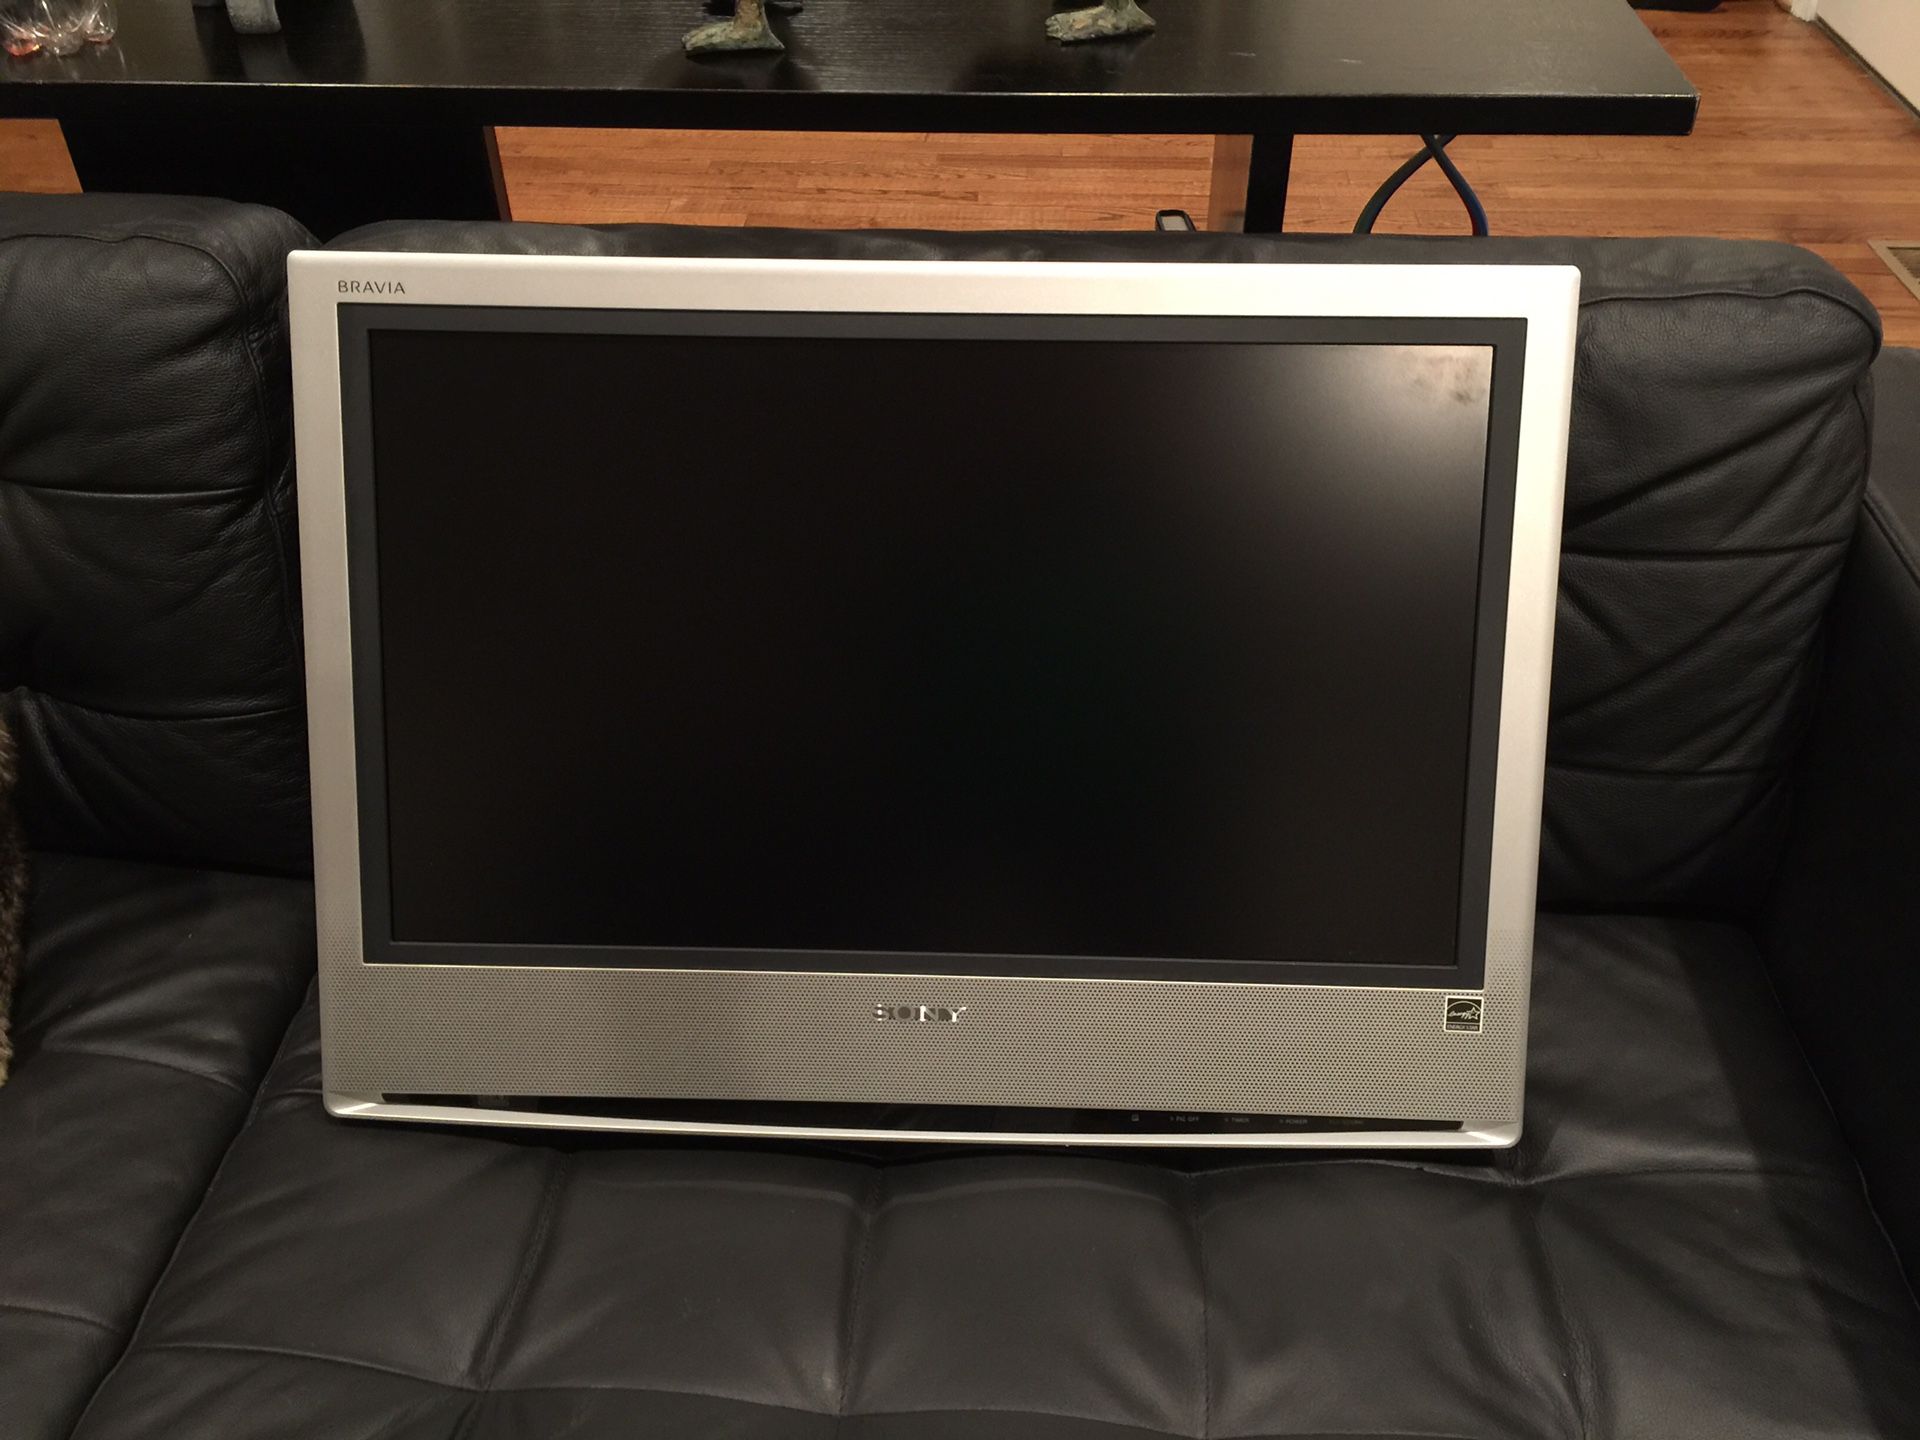 Sony Bravia 26” Wall Mounted LCD Color TV